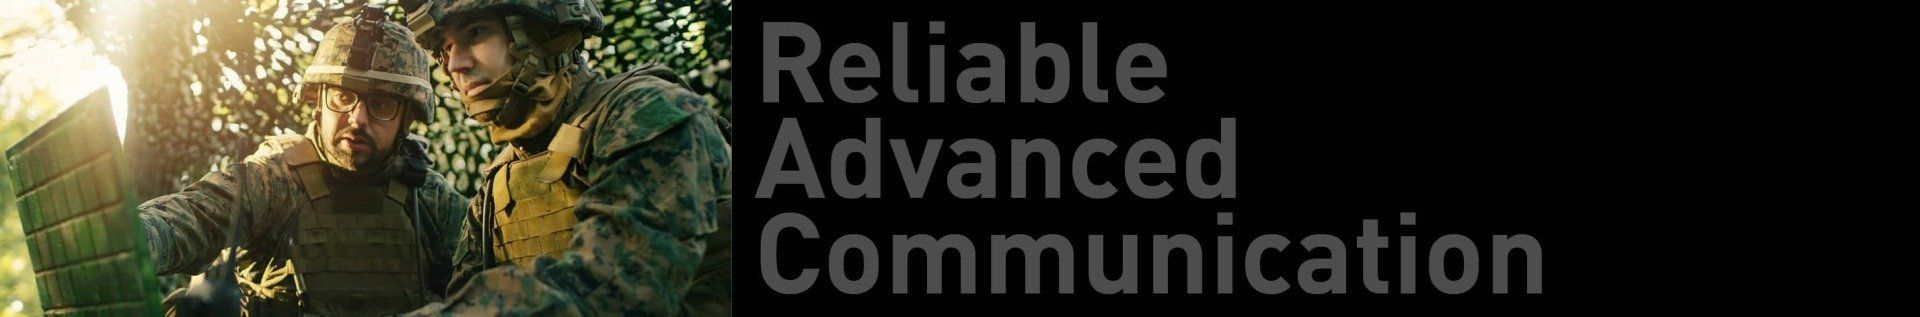 Reliable Advanced Communication banner